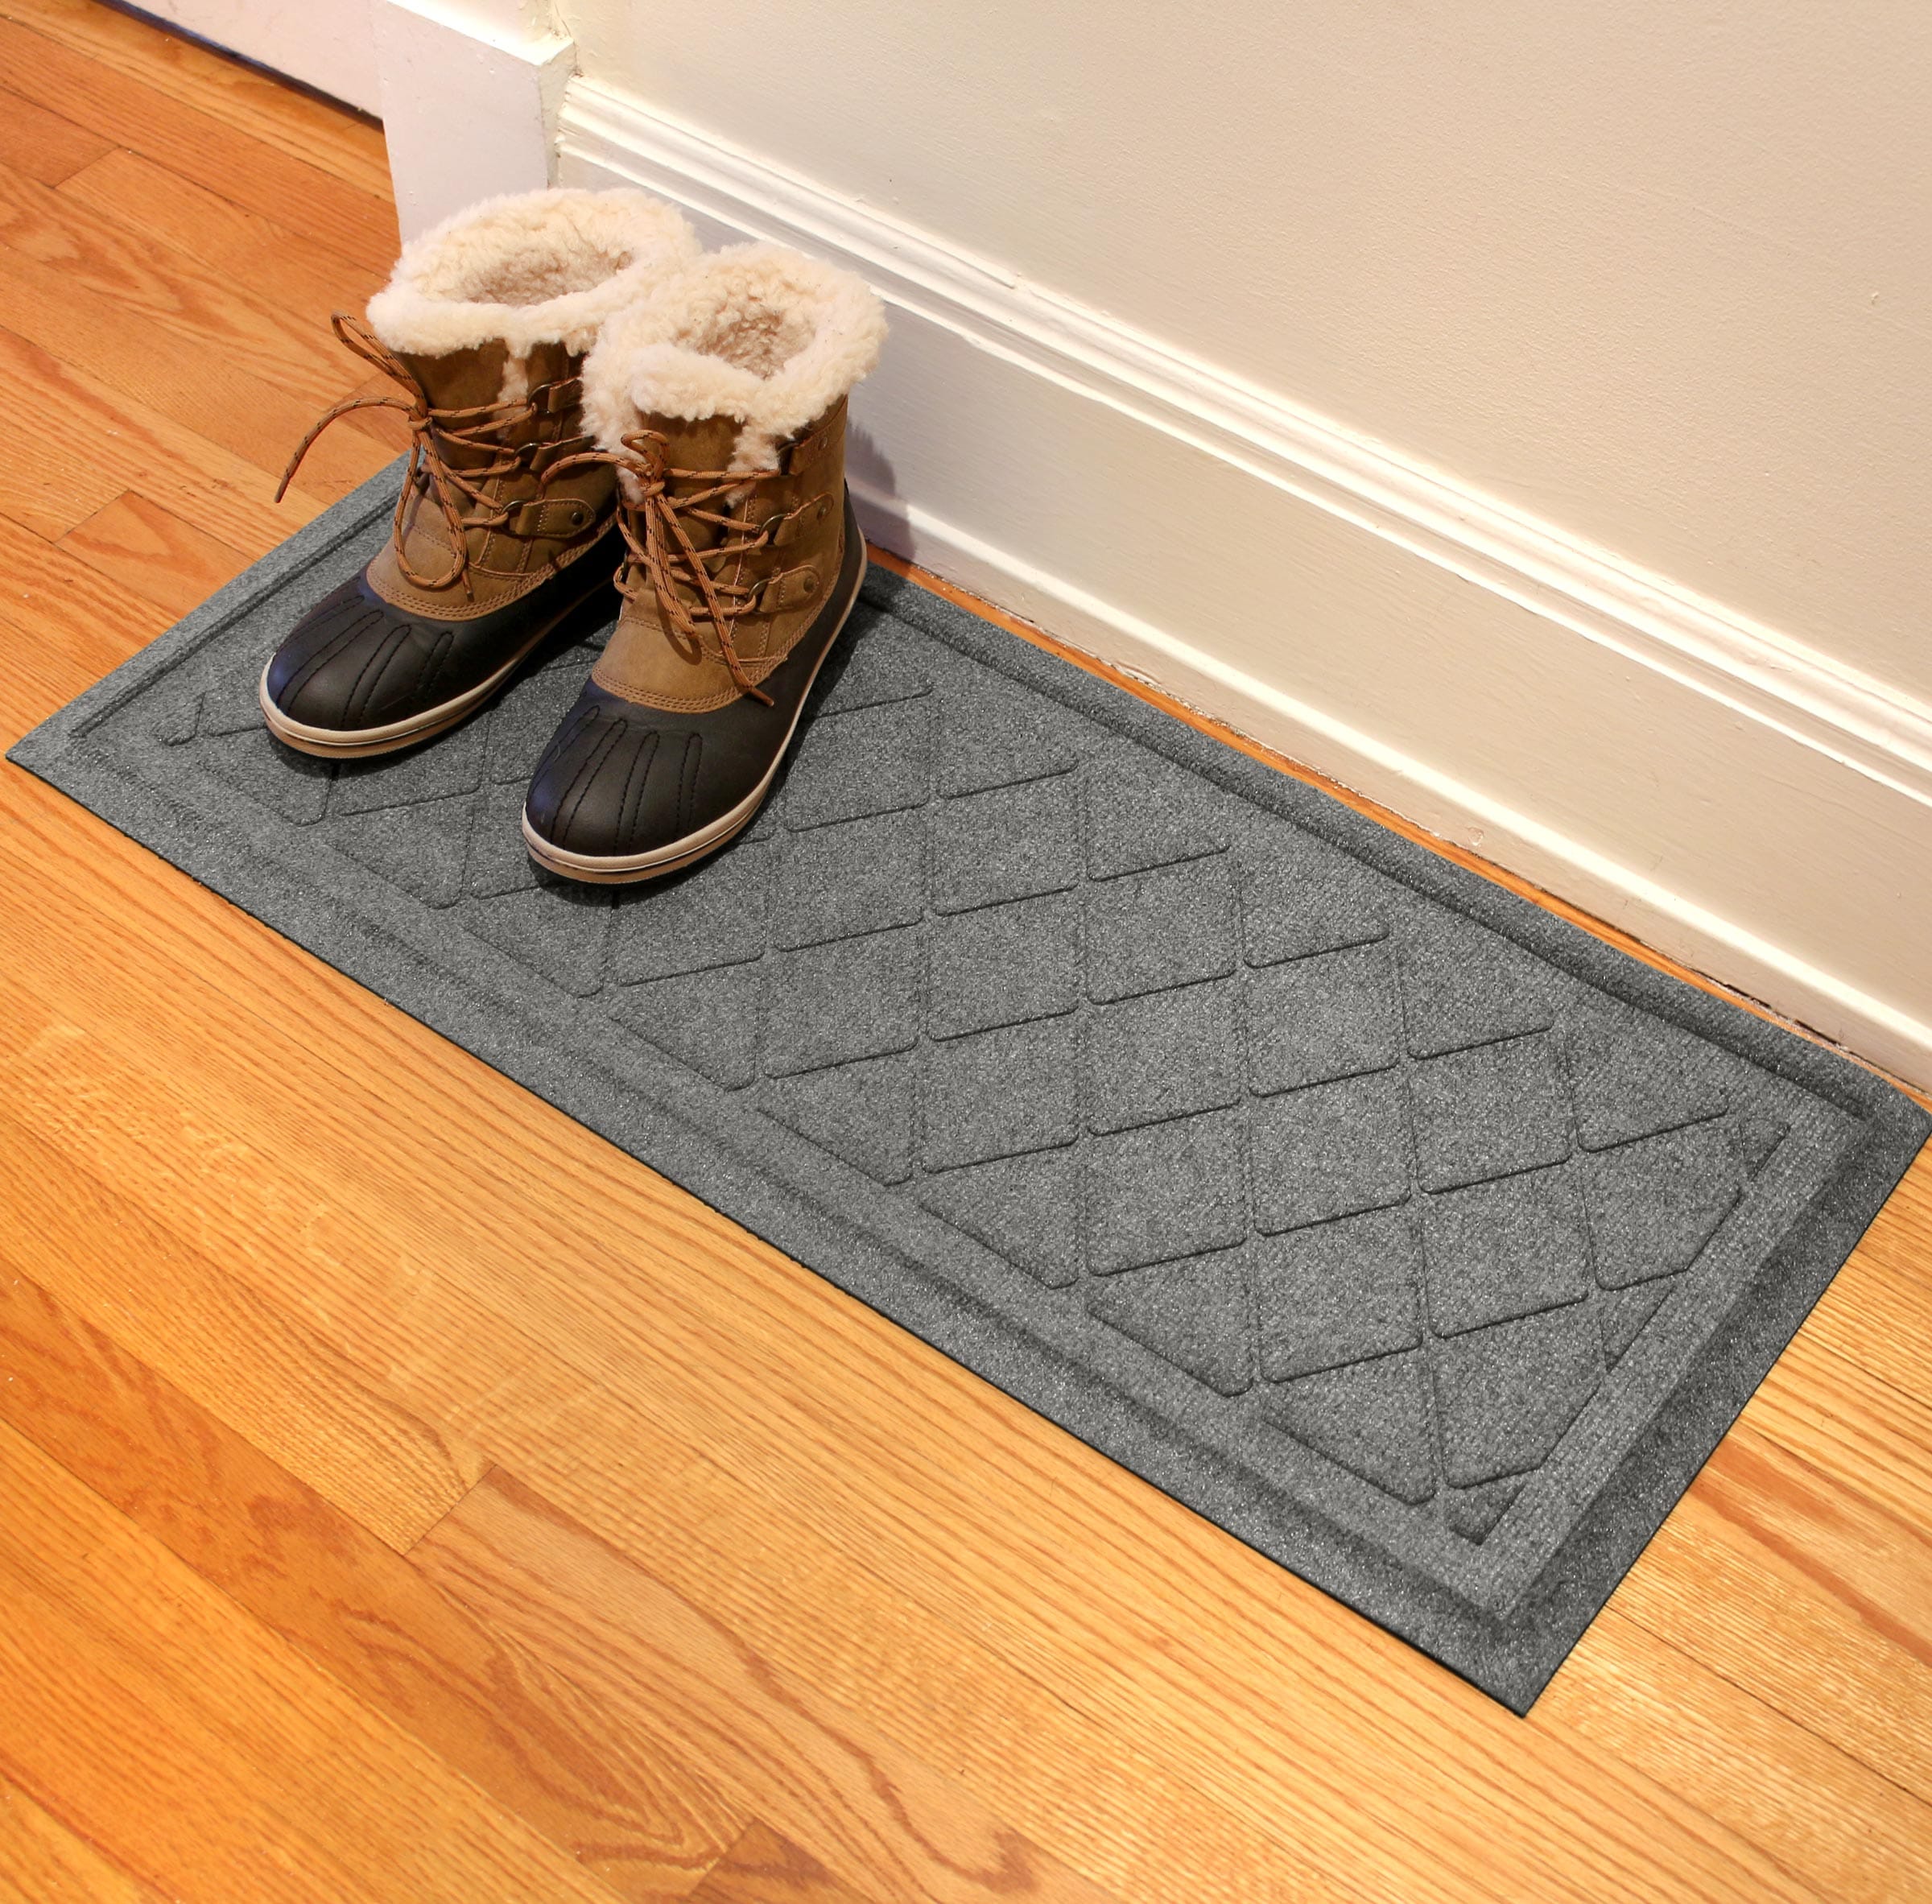 Large All-Weather Indoor/Outdoor Boot Tray - Weather-Resistant Plastic Shoe  Mat with Raised Edge for Entryways, Decks, and Patios by Stalwart (Black)